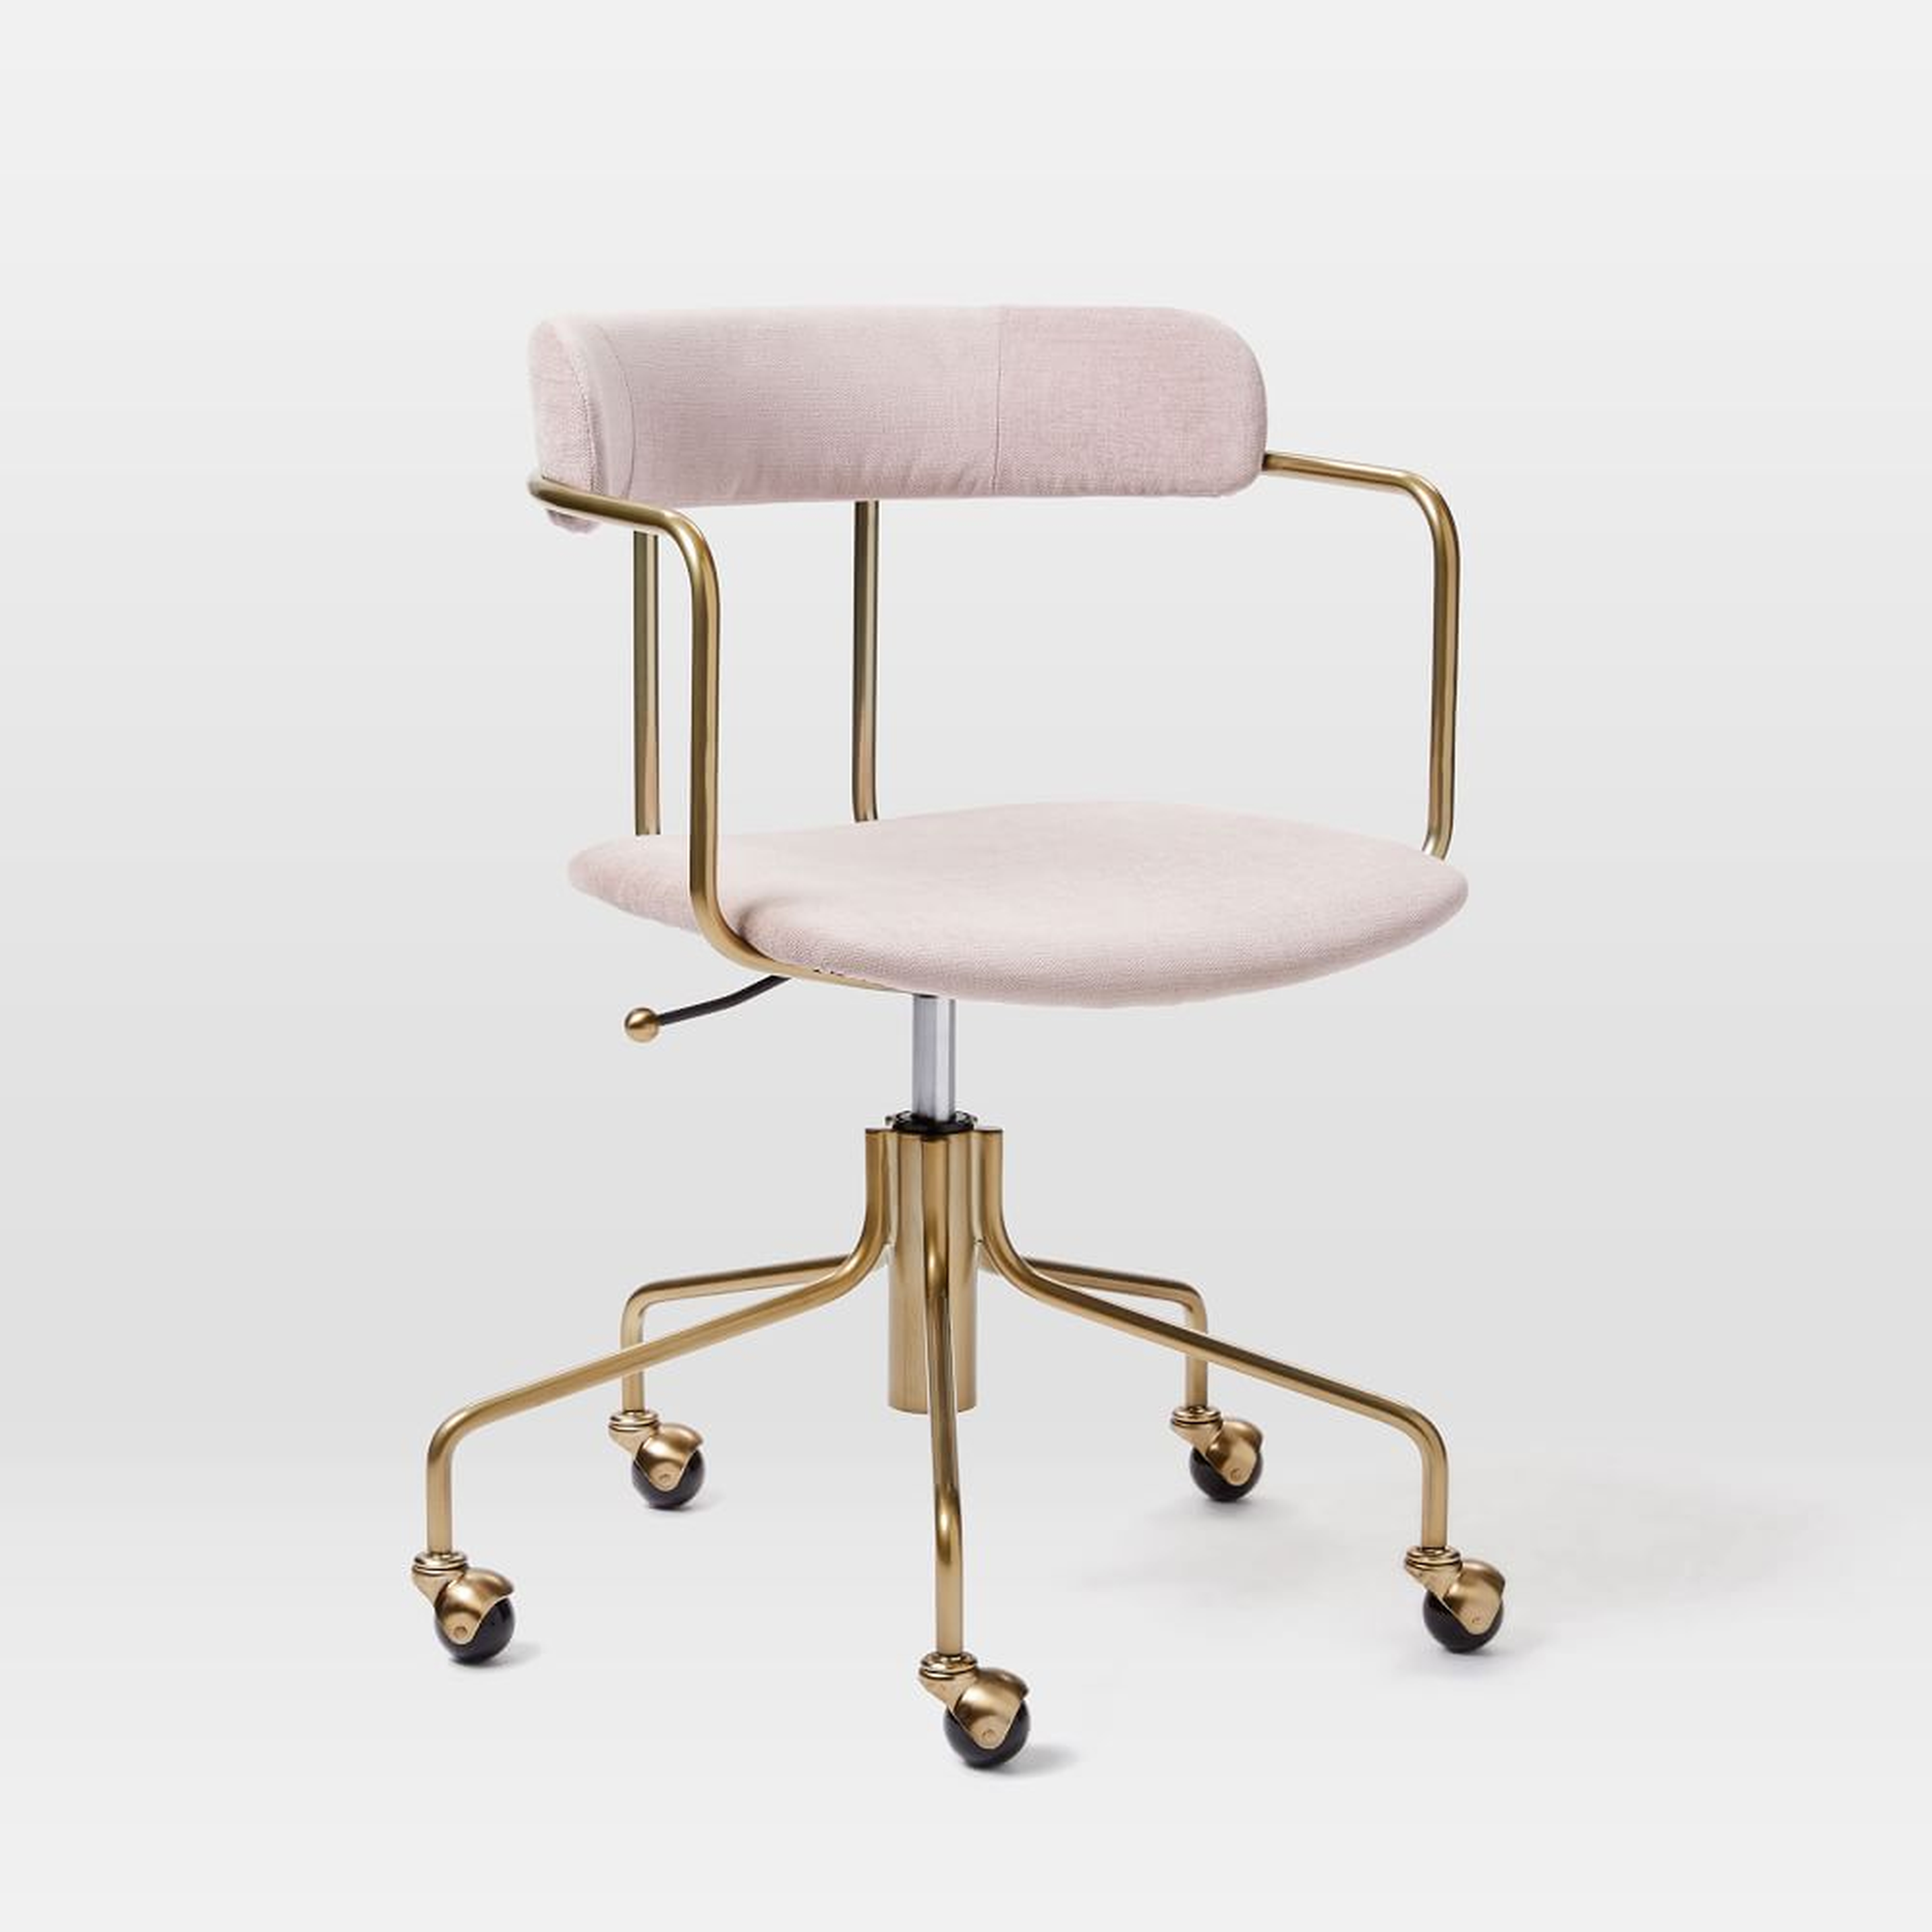 Lennox Office Chair Collection Blush/Blackened Brass Office Chair - West Elm